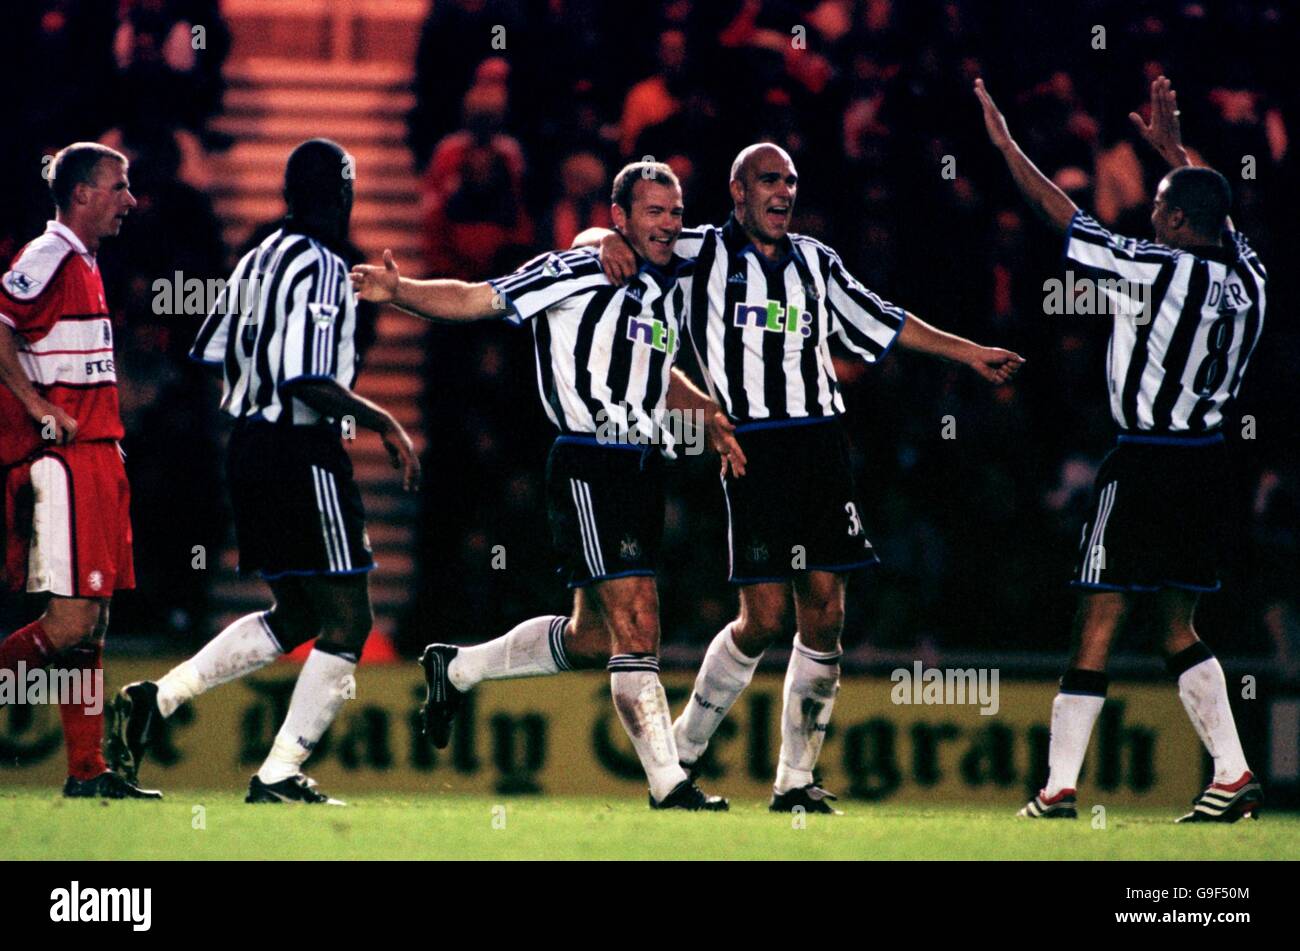 Newcastle United's Alan Shearer (c) celebrates scoring the first goal with teammates Laurent Charvet (second r) and Kieron Dyer (r) Stock Photo